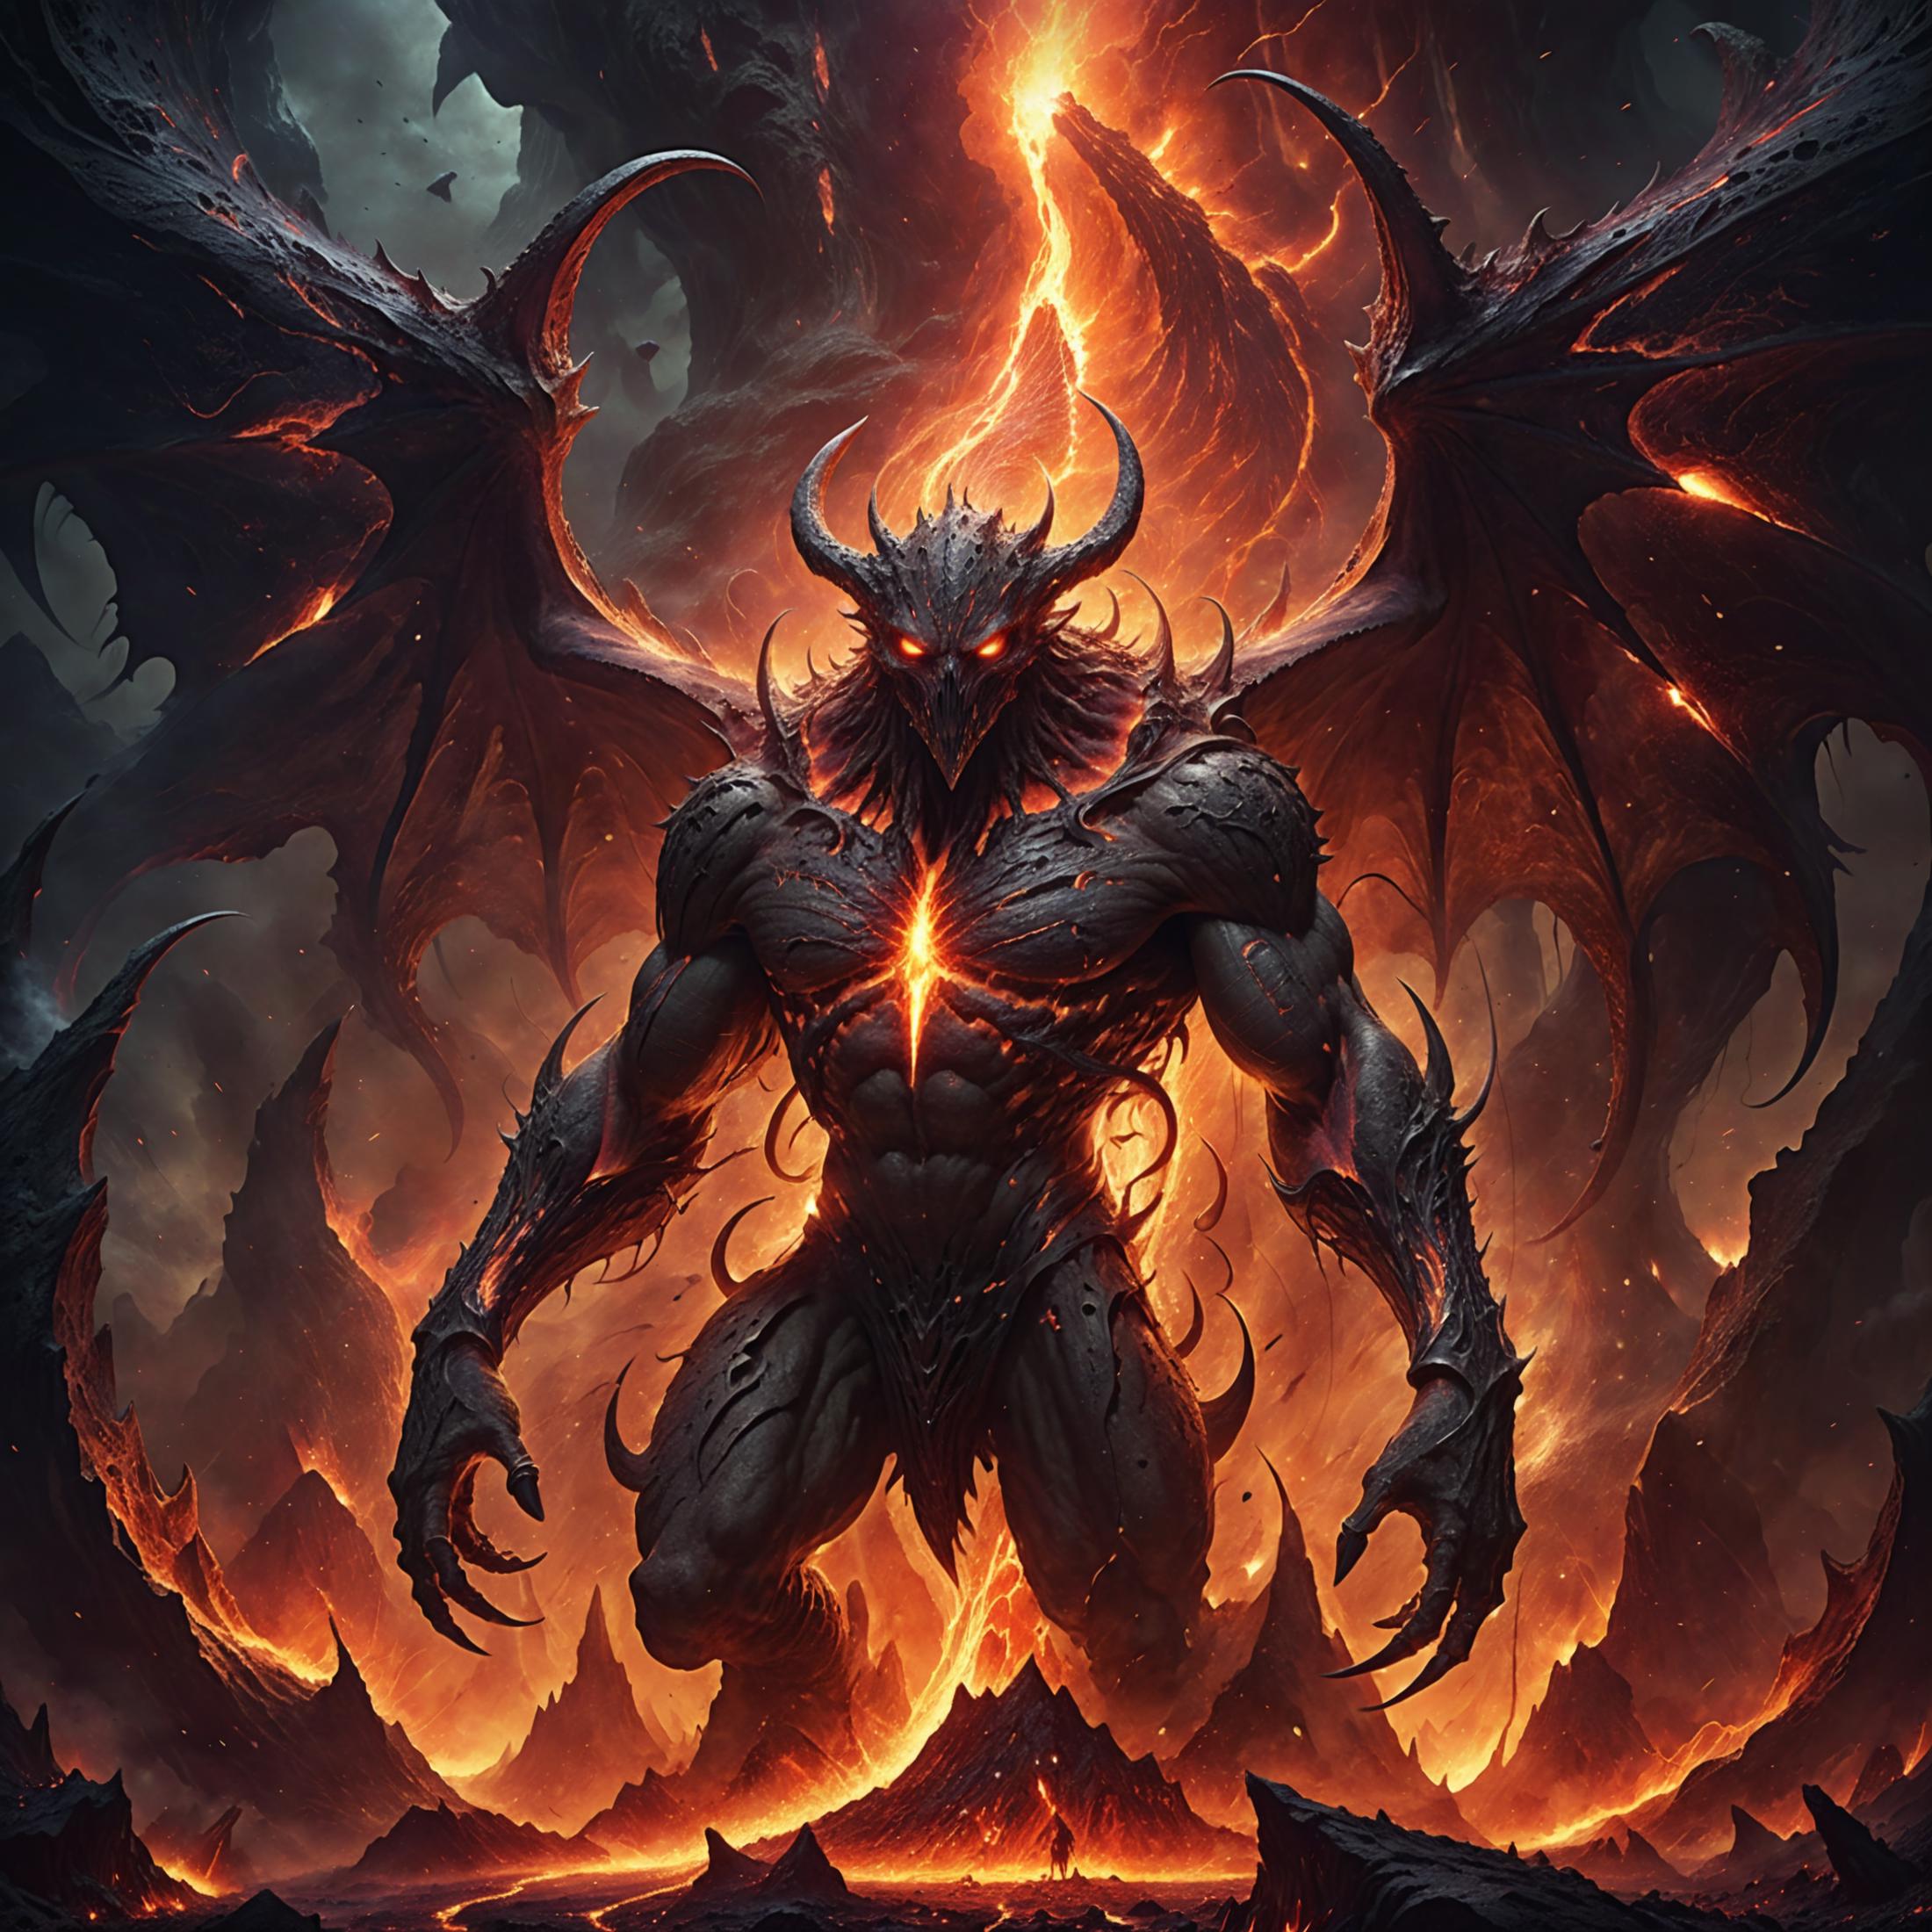 A demonic creature with horns and a sword stands in a fiery background.